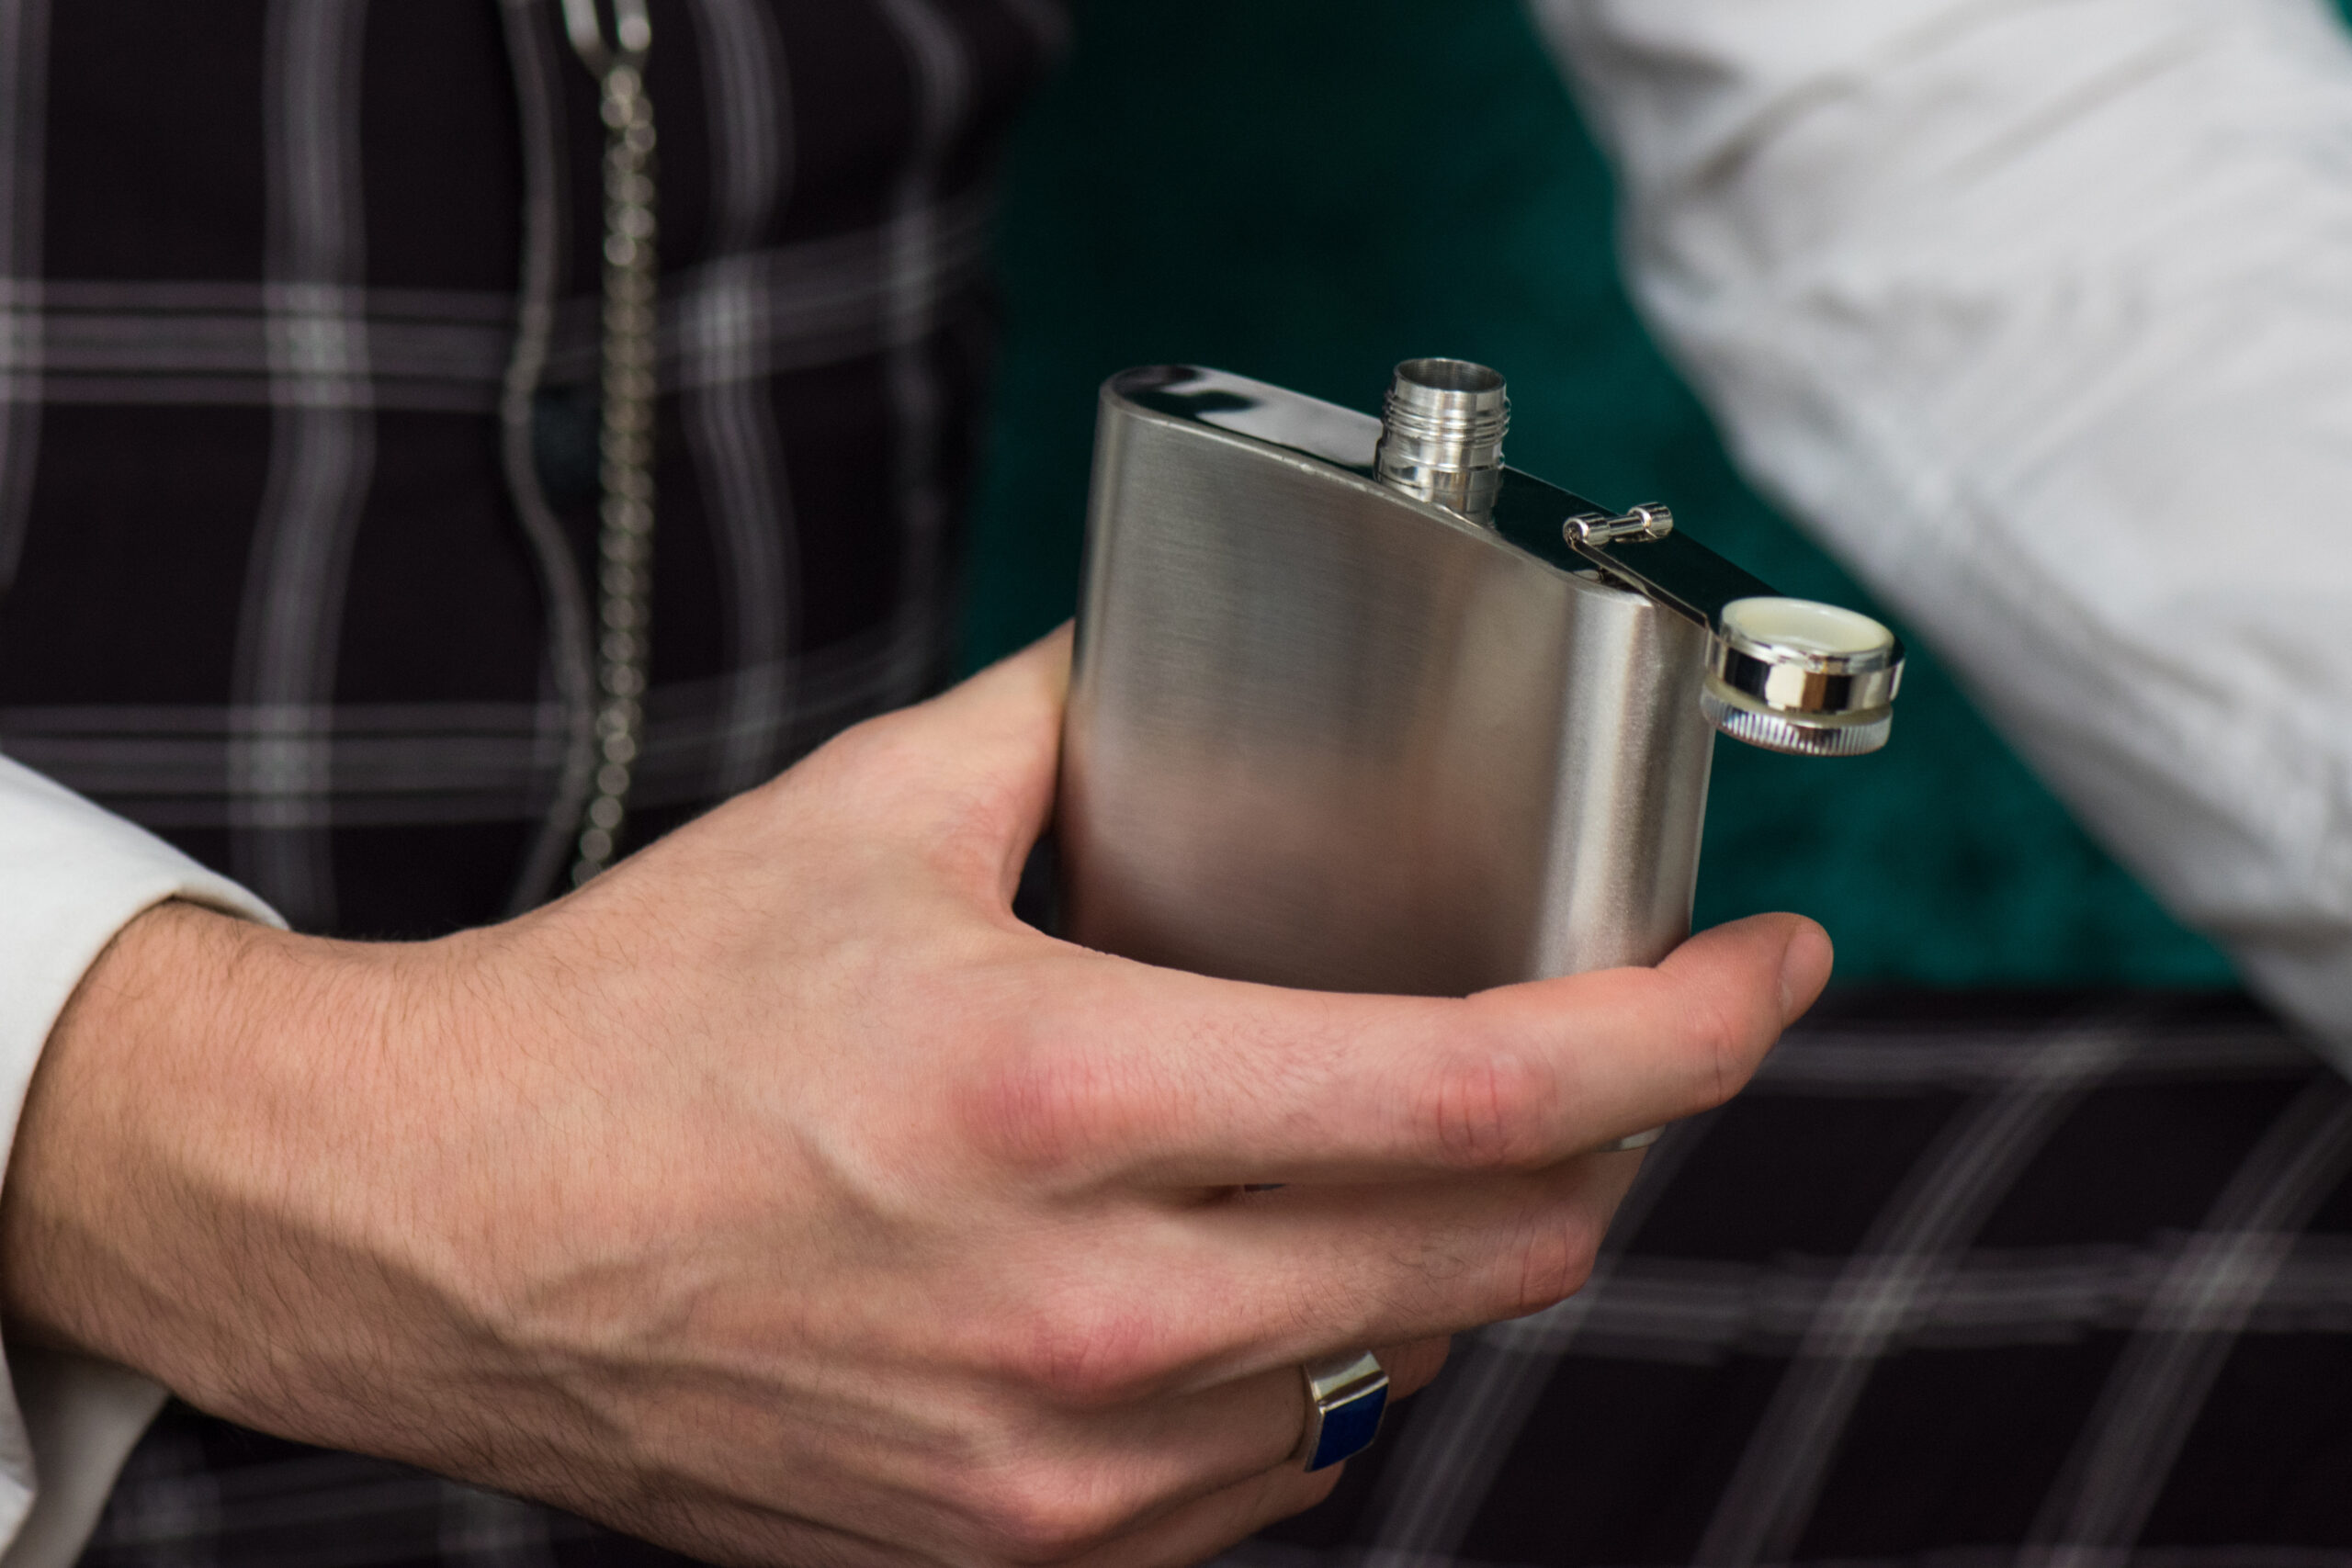 flask-whisky-alcohol-old-vintage-john-shelby-wear-hand